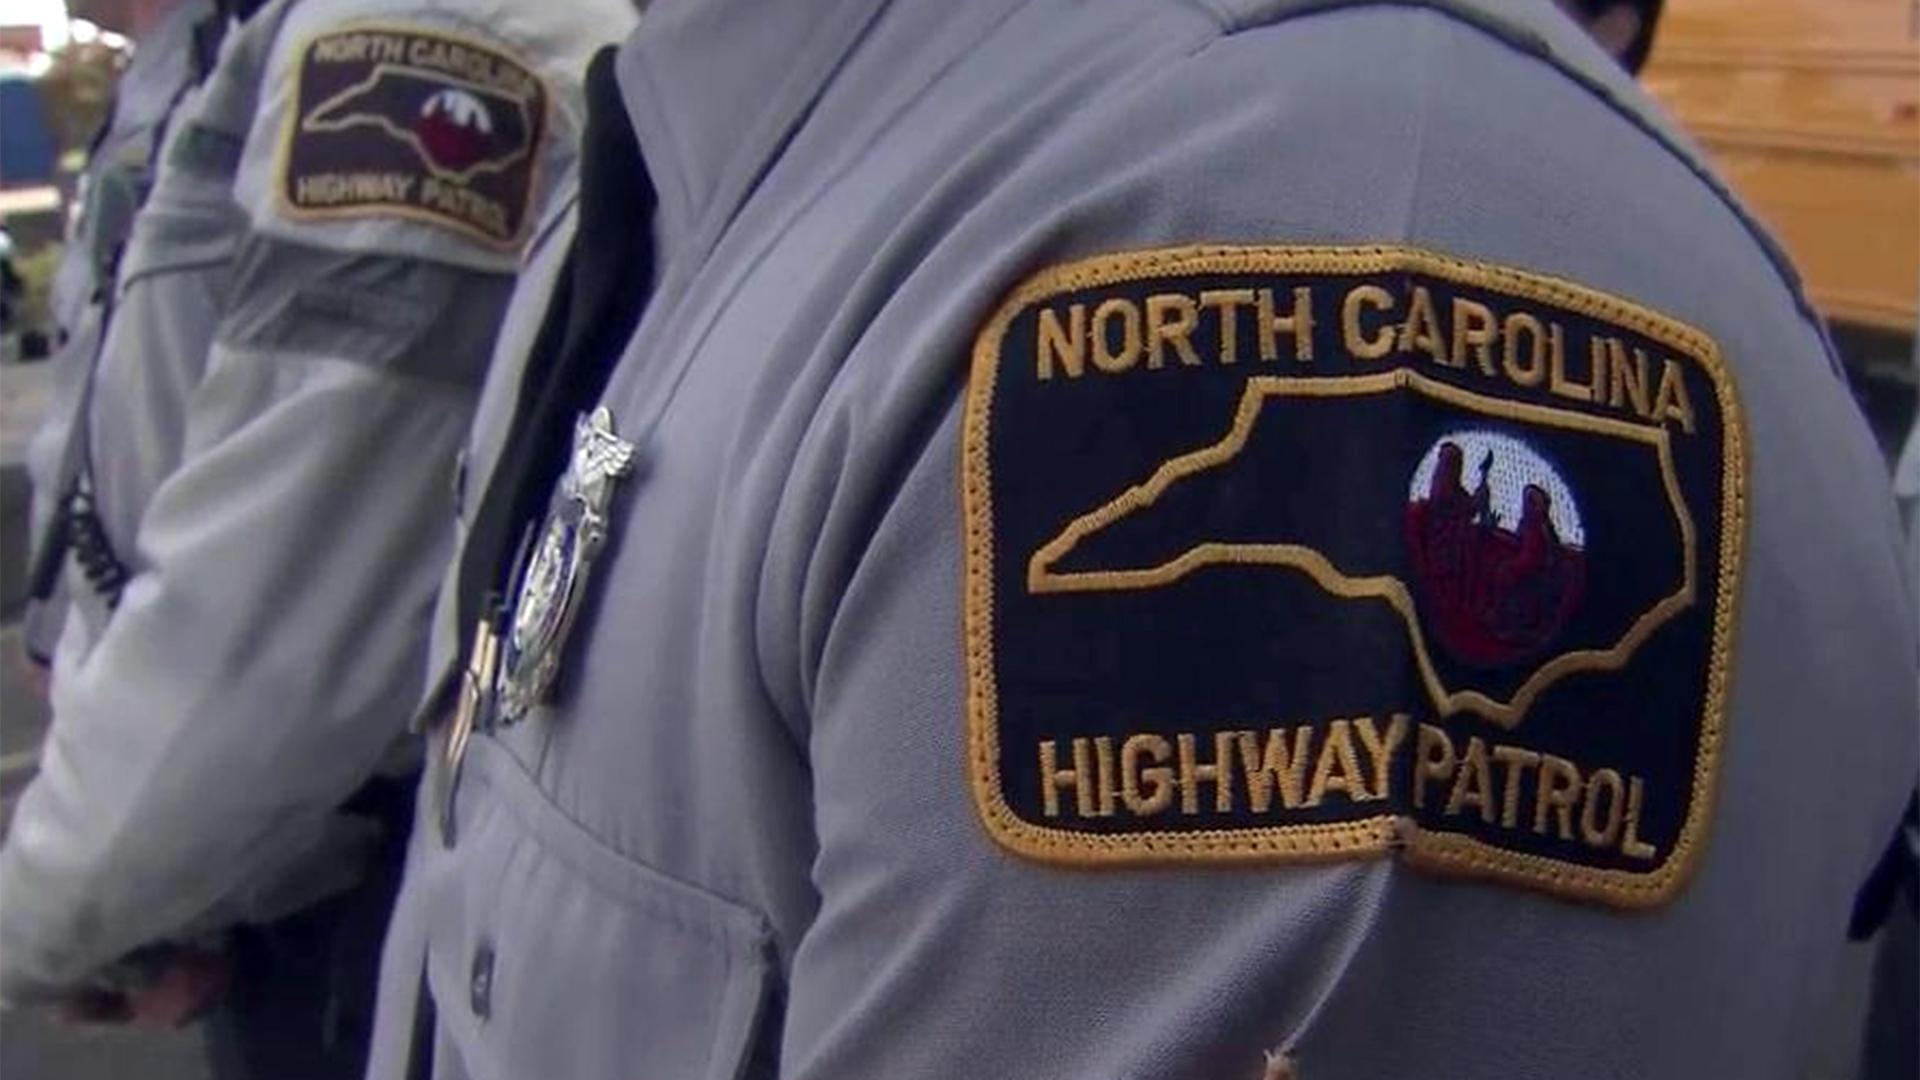 NC public safety agency gave $1.7M in raises to senior officers, staff - WRAL.com